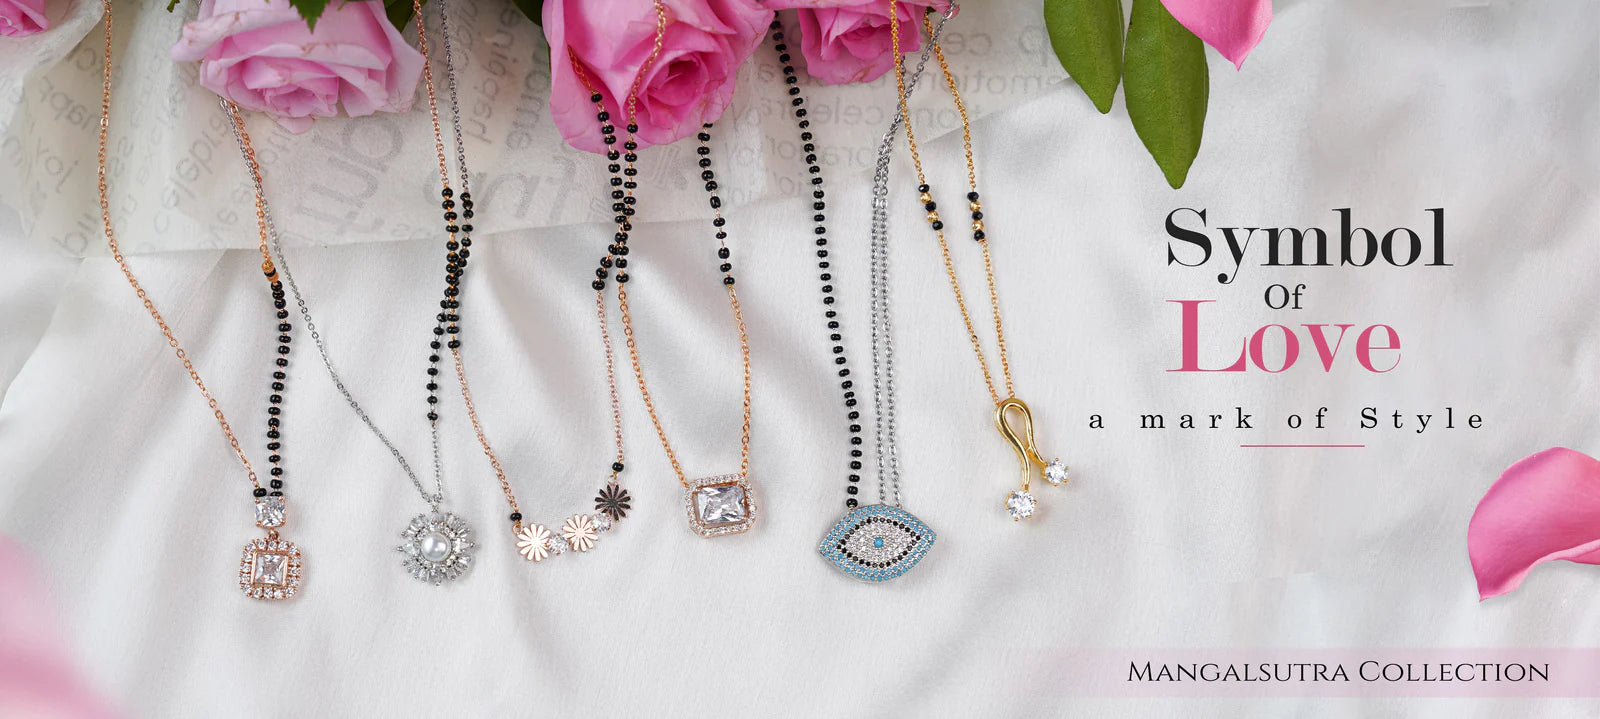 The Soulmates Necklace Collection